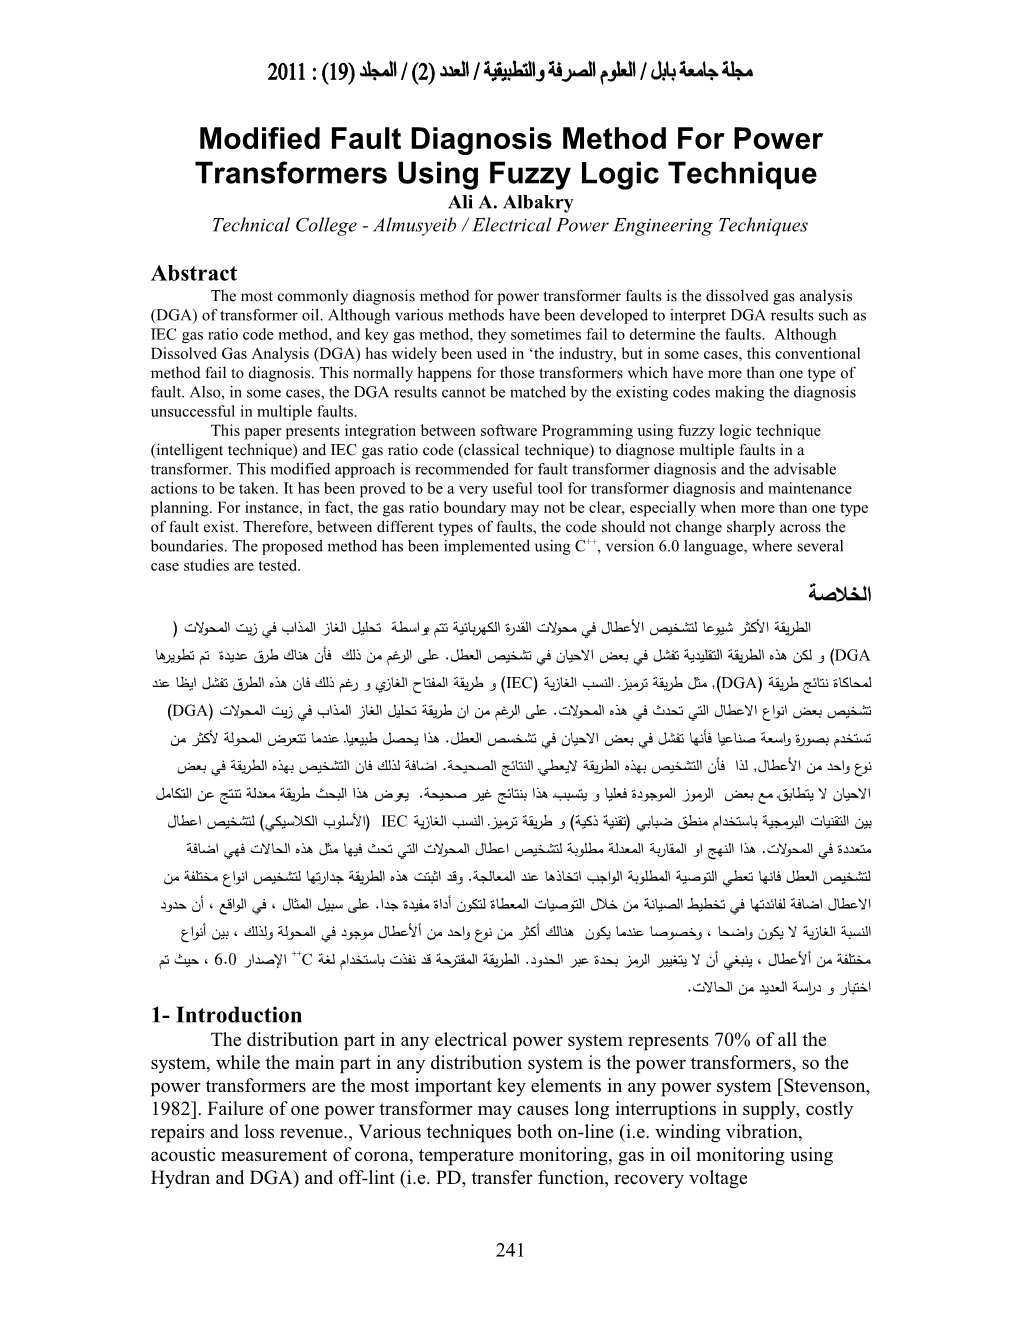 Modified Fault Diagnosis Method for Power Transformers by Fuzzy Logic Theory